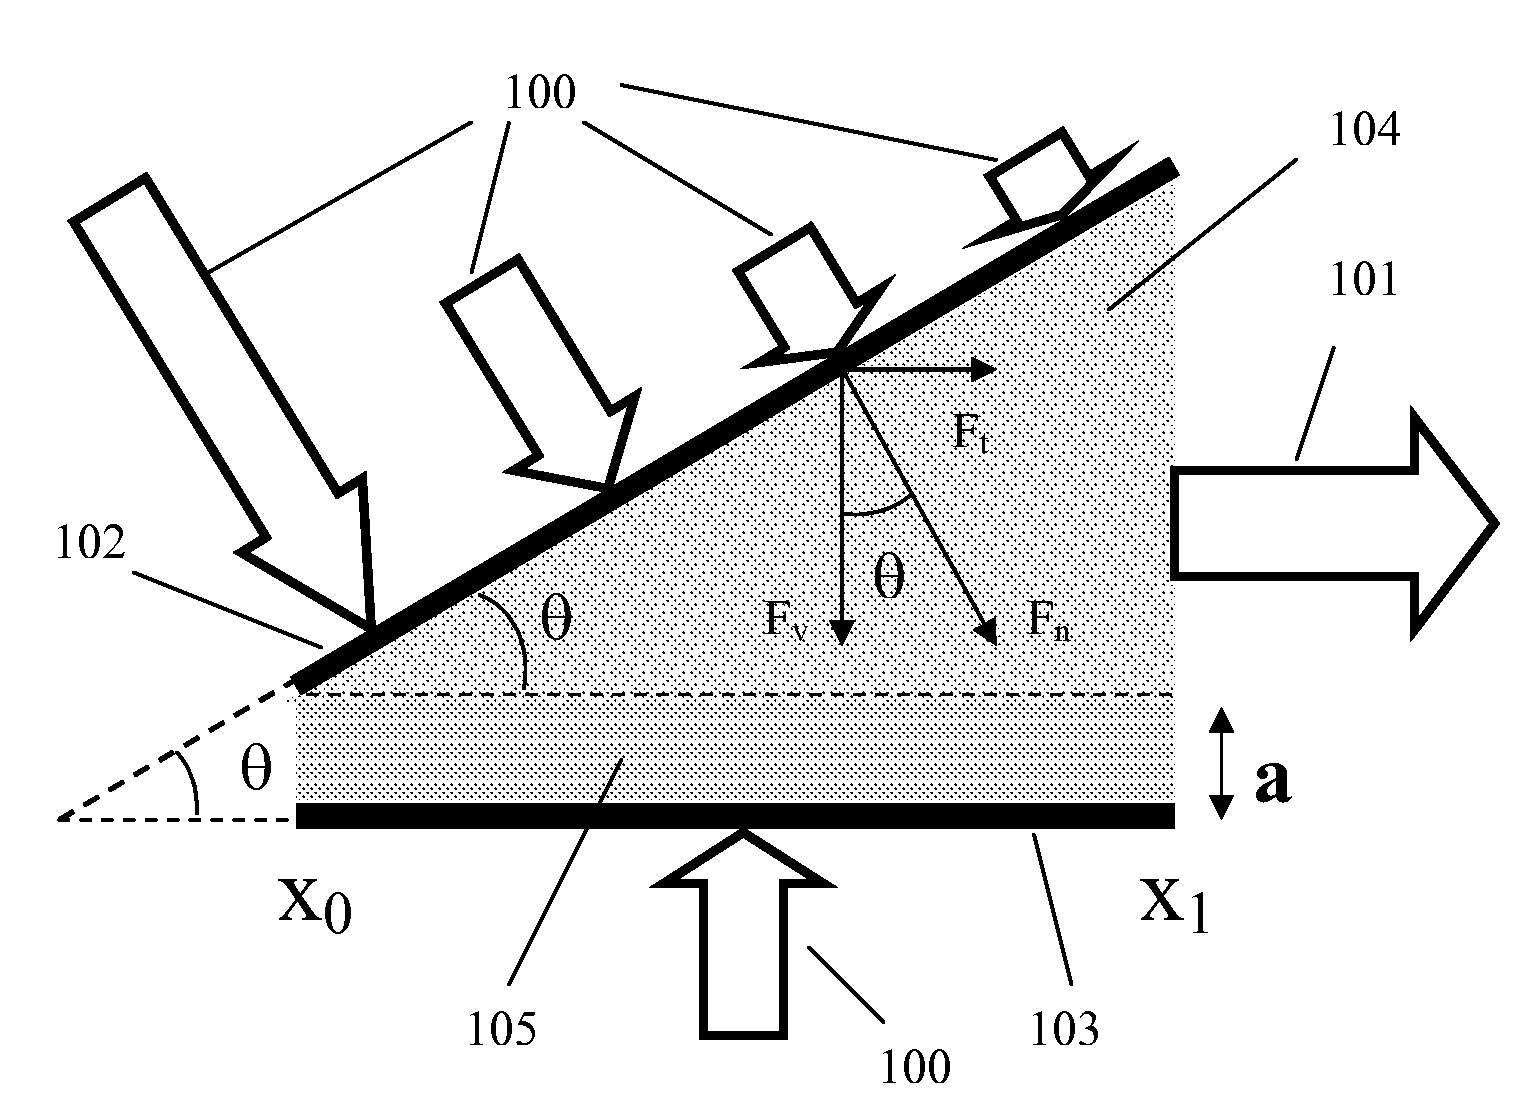 Method and Device to Generate a Transverse Casimir Force for Propulsion, Guidance and Maneuvering of a Space Vehicle